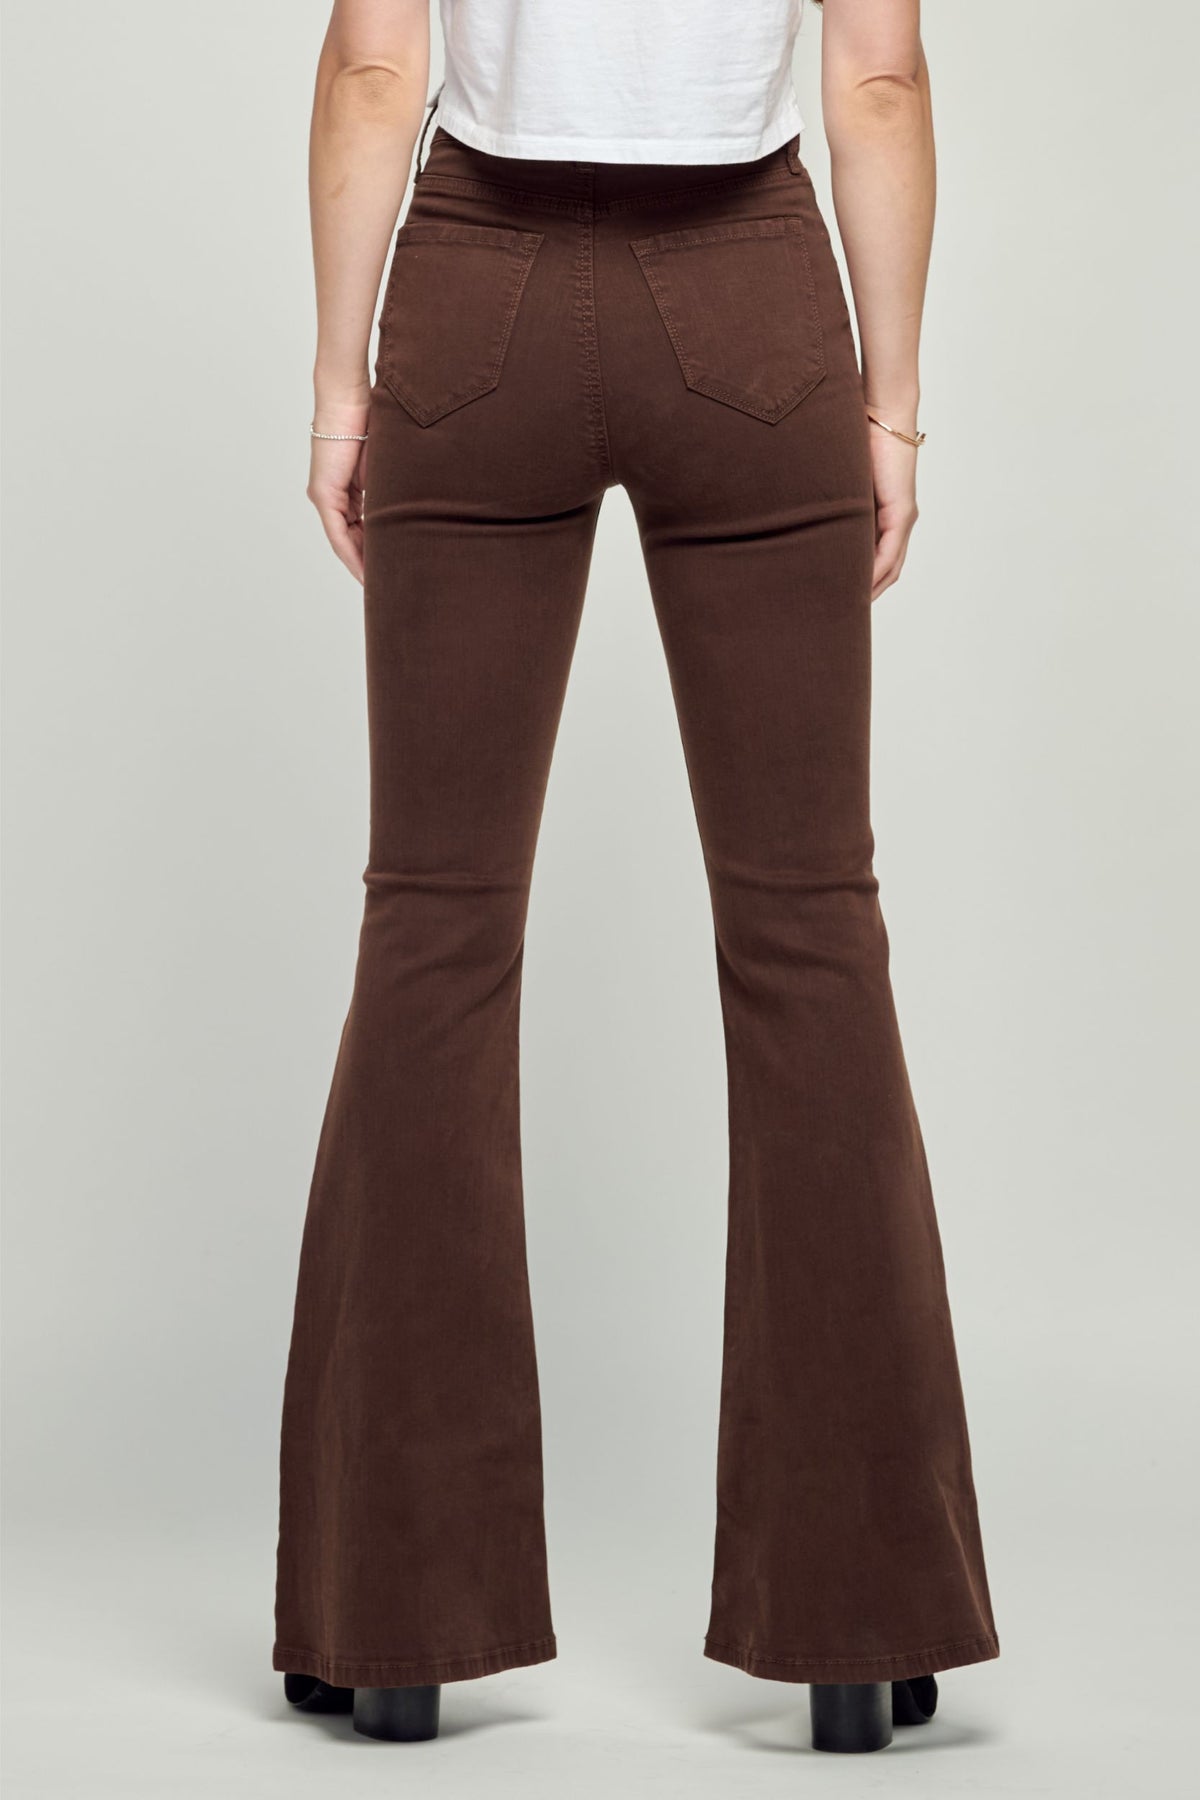 Autumn Brown Flare Jeans